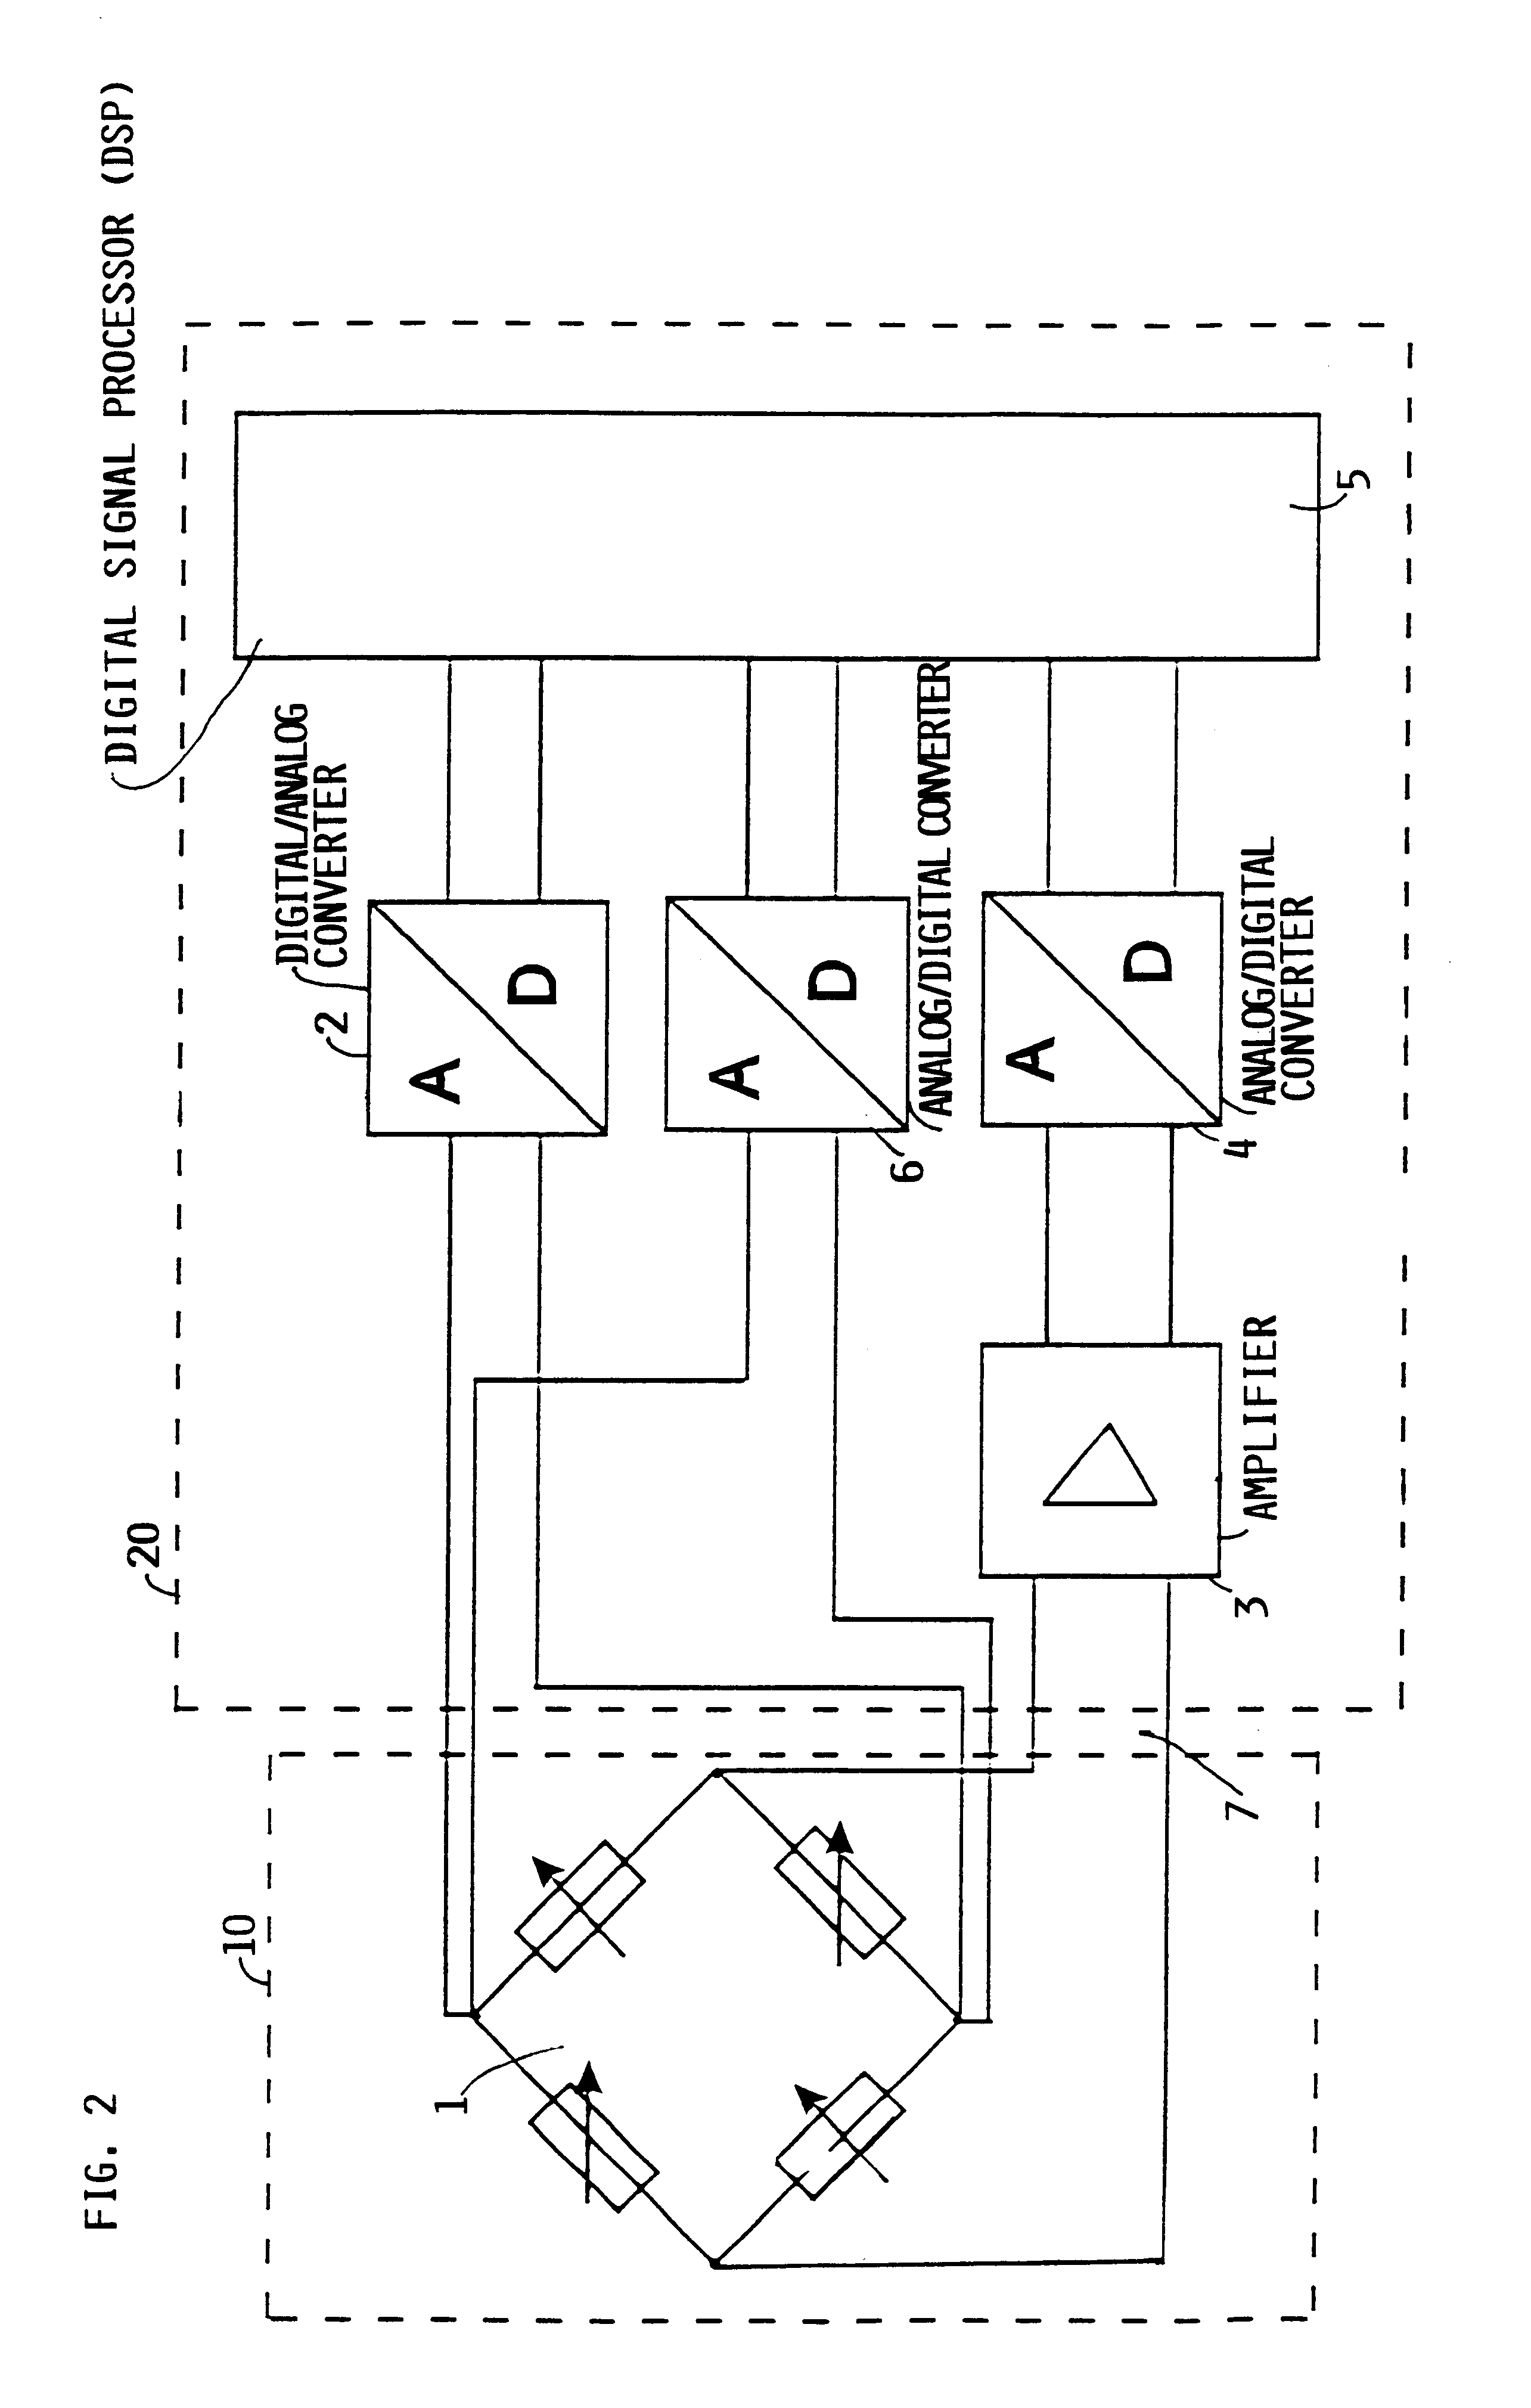 Carrier frequency measuring method and apparatus